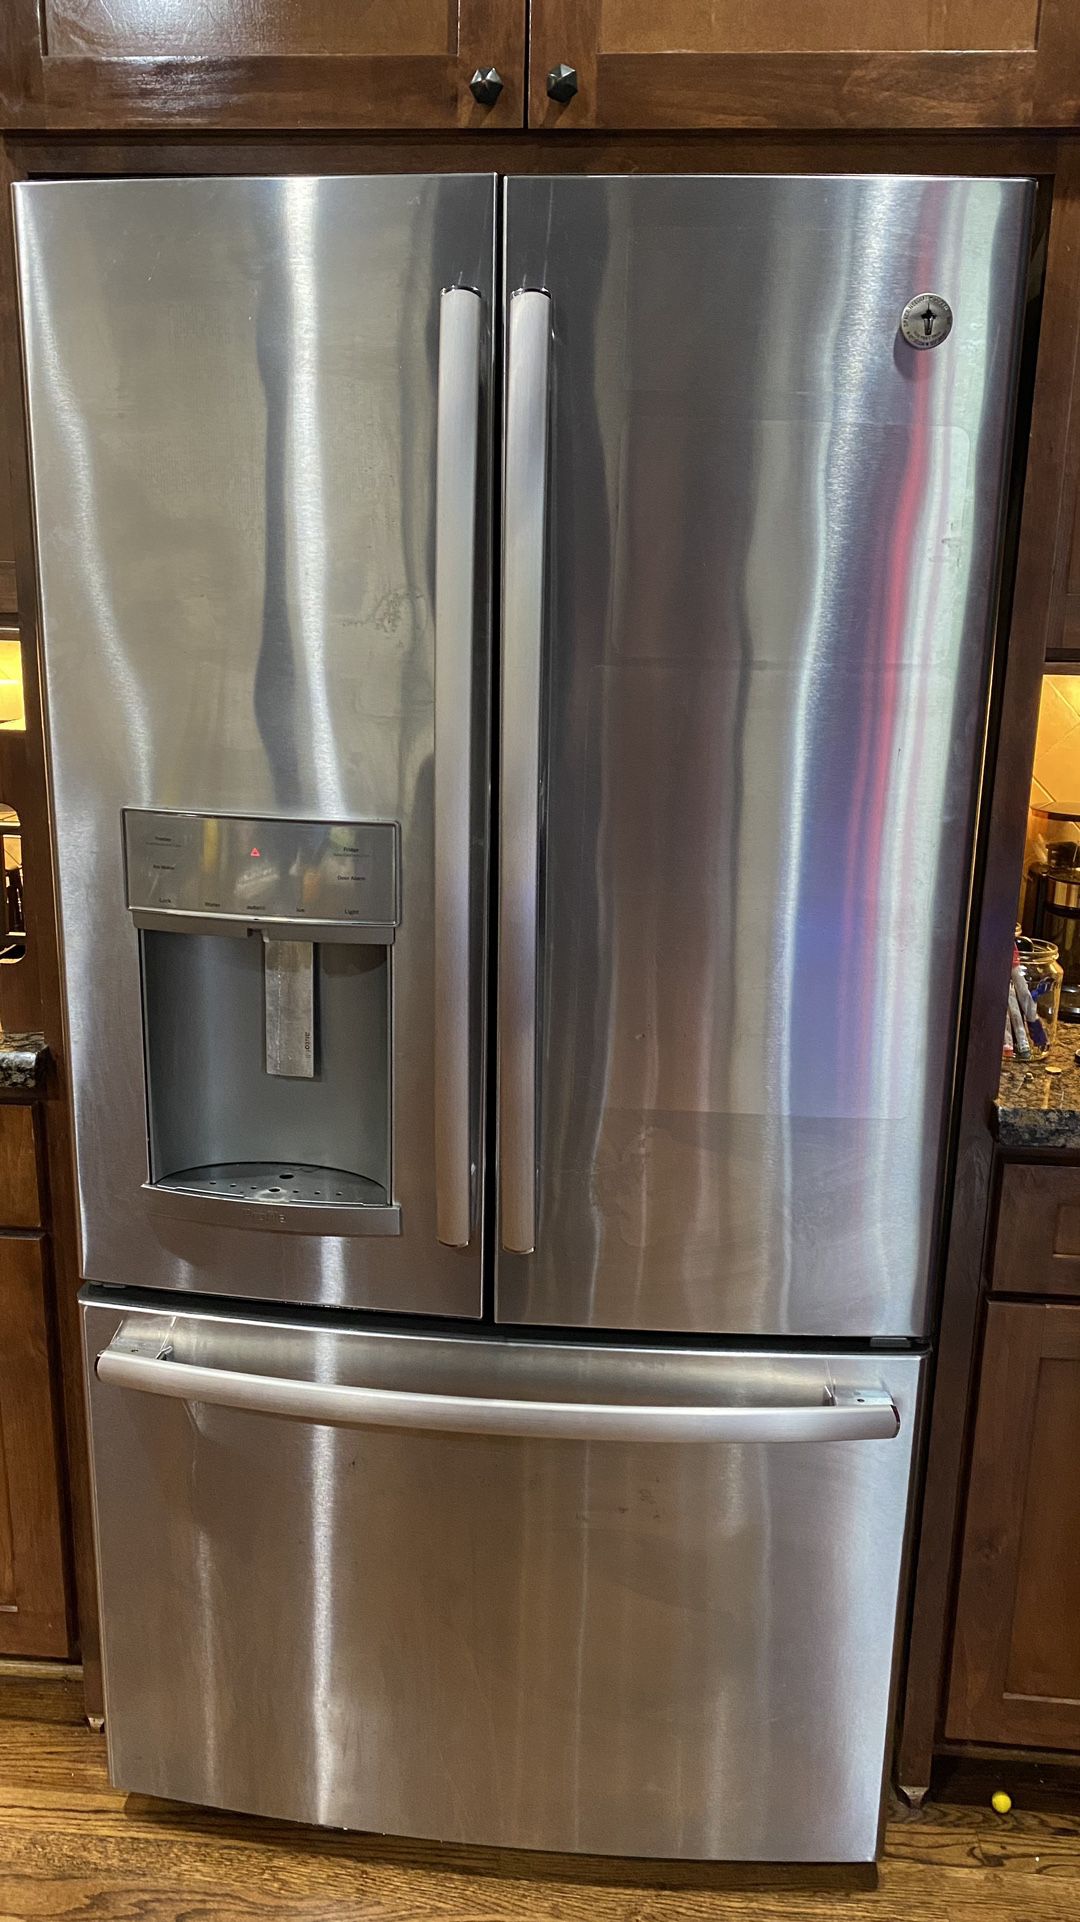 Free Refrigerator - Doesn’t Work